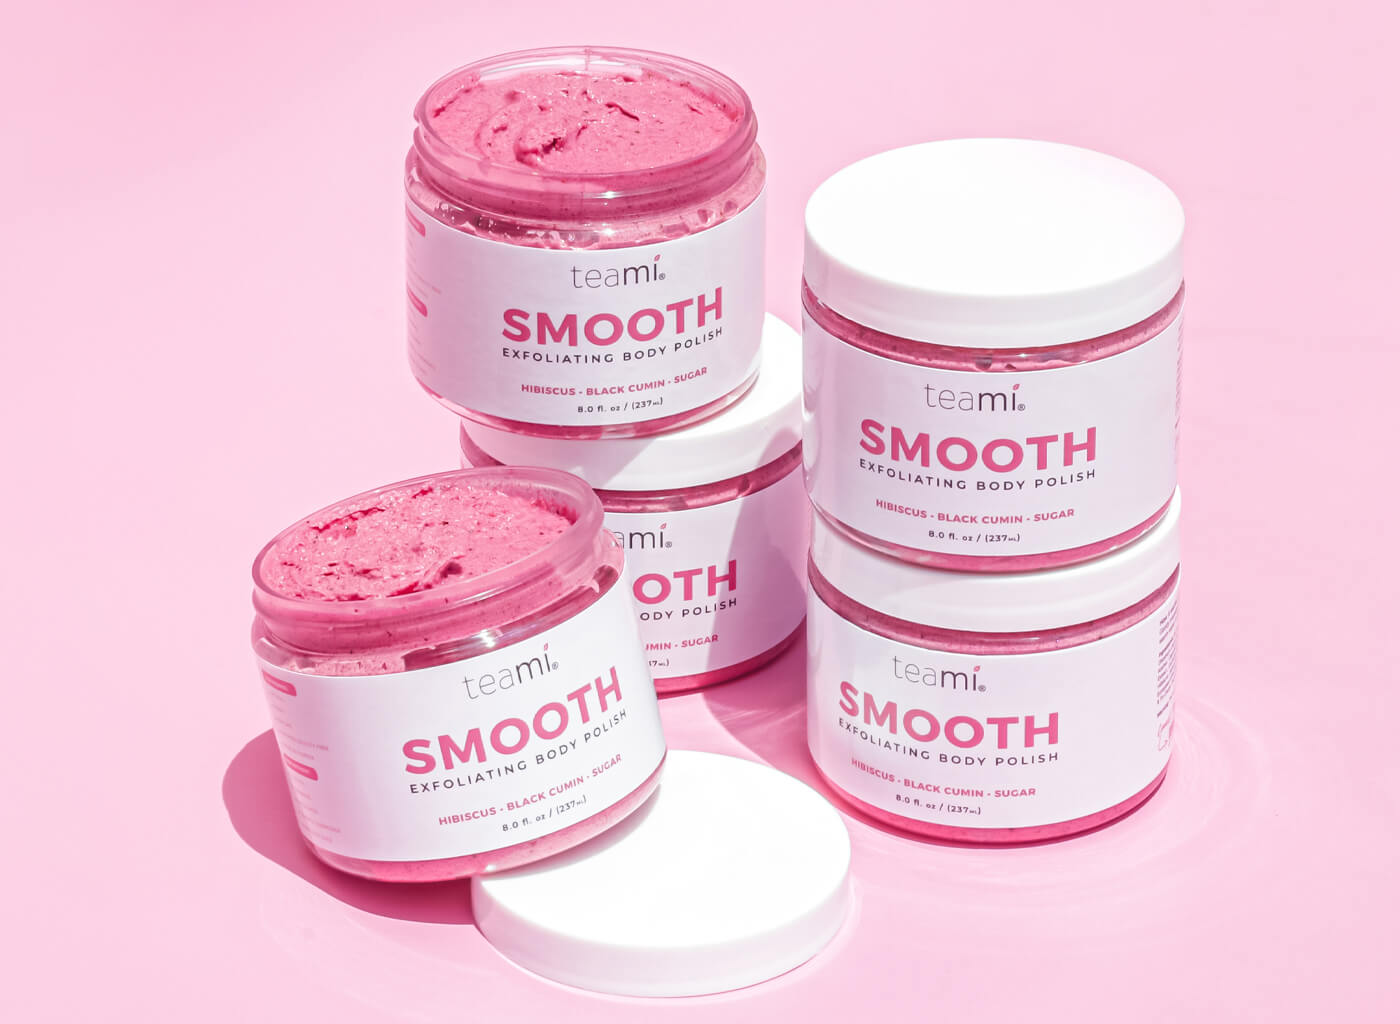 Multiple tubs of Teami smooth exfoliating body polish